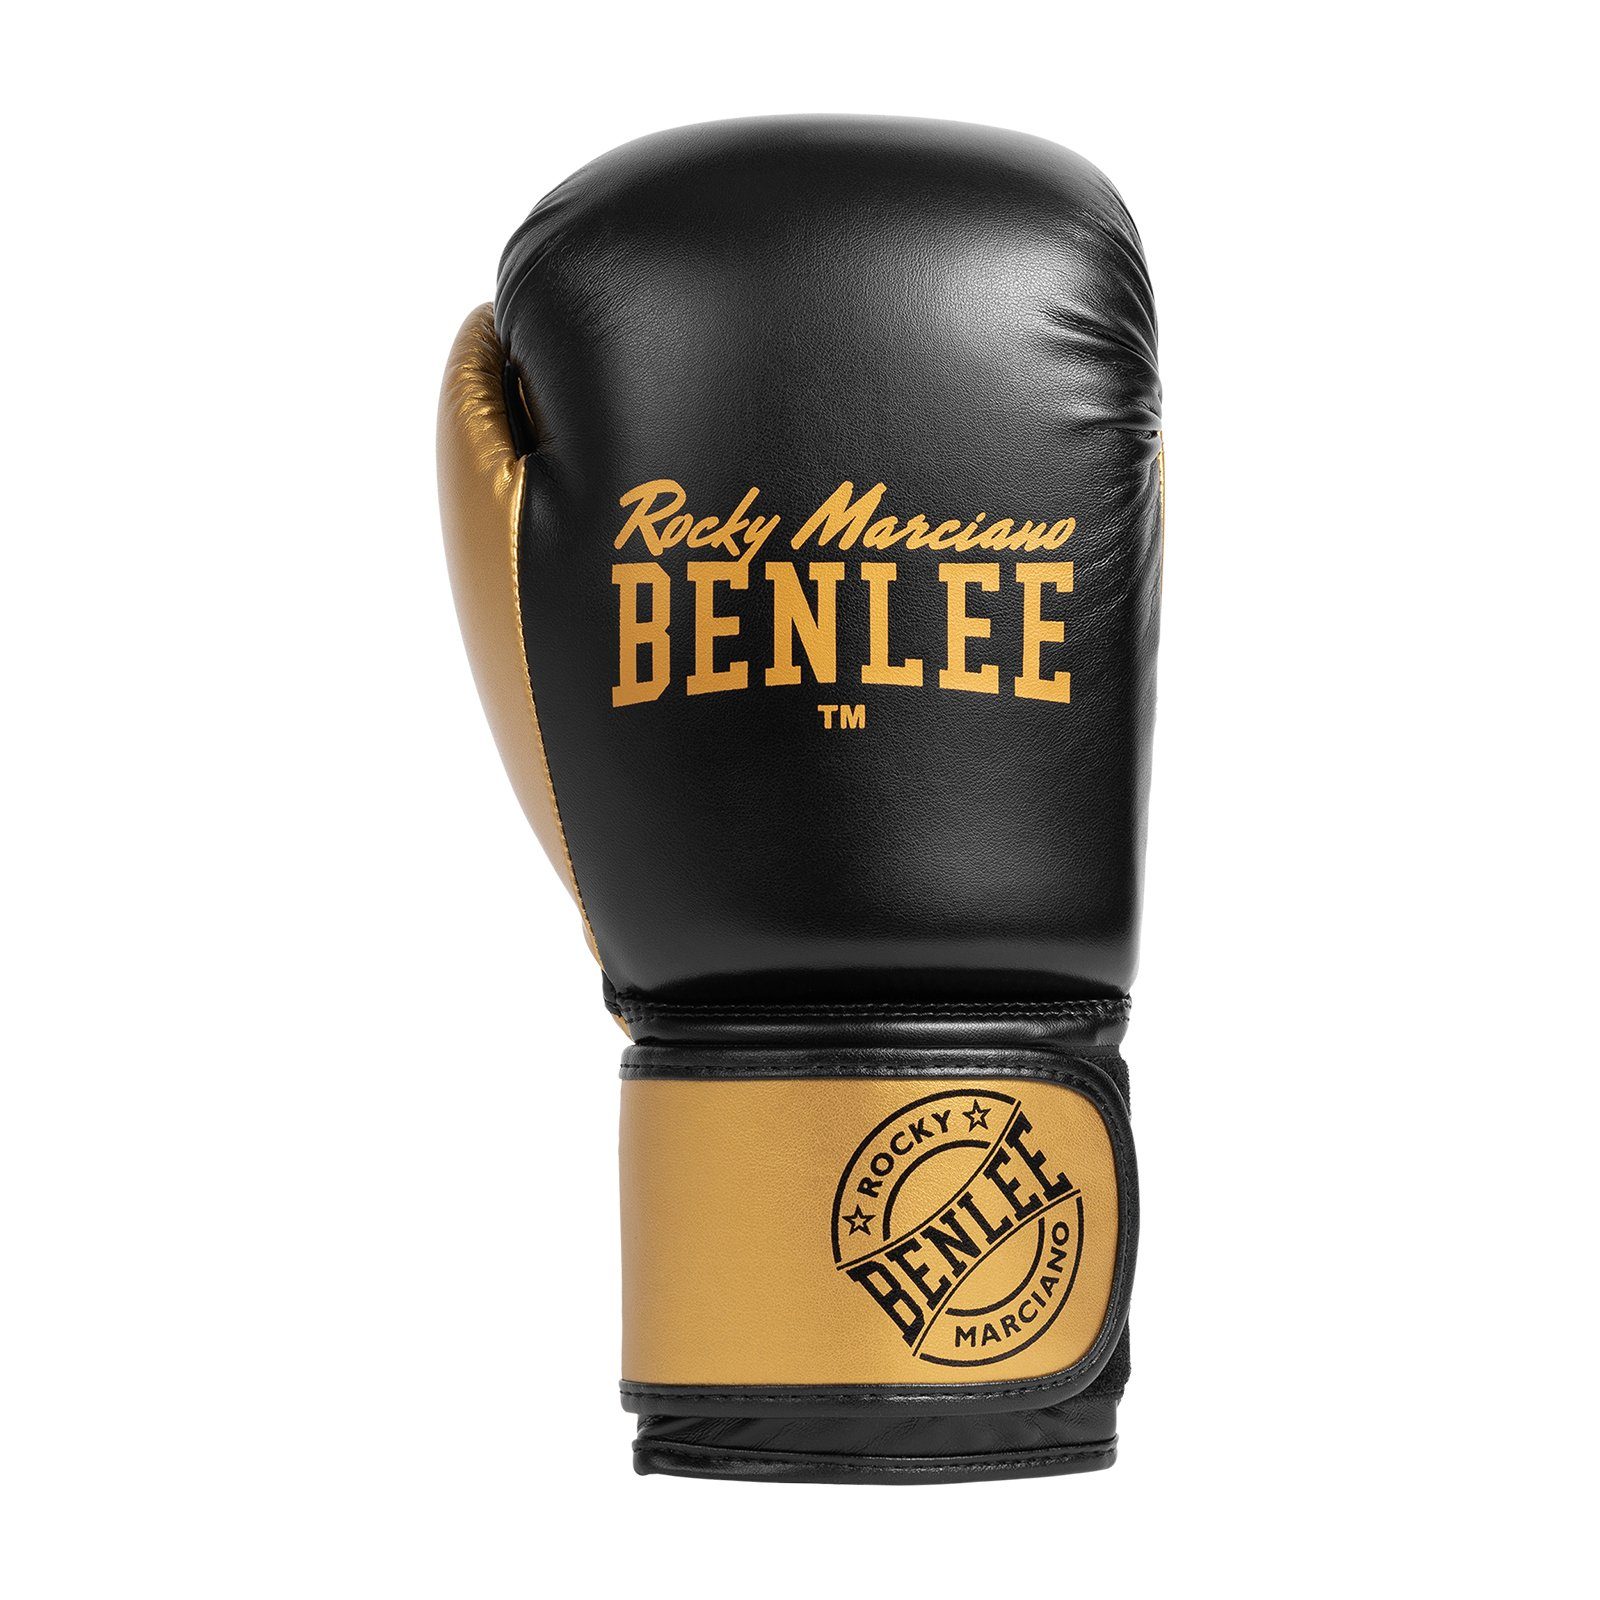 Benlee Rocky Marciano Boxhandschuhe CARLOS Black/Gold